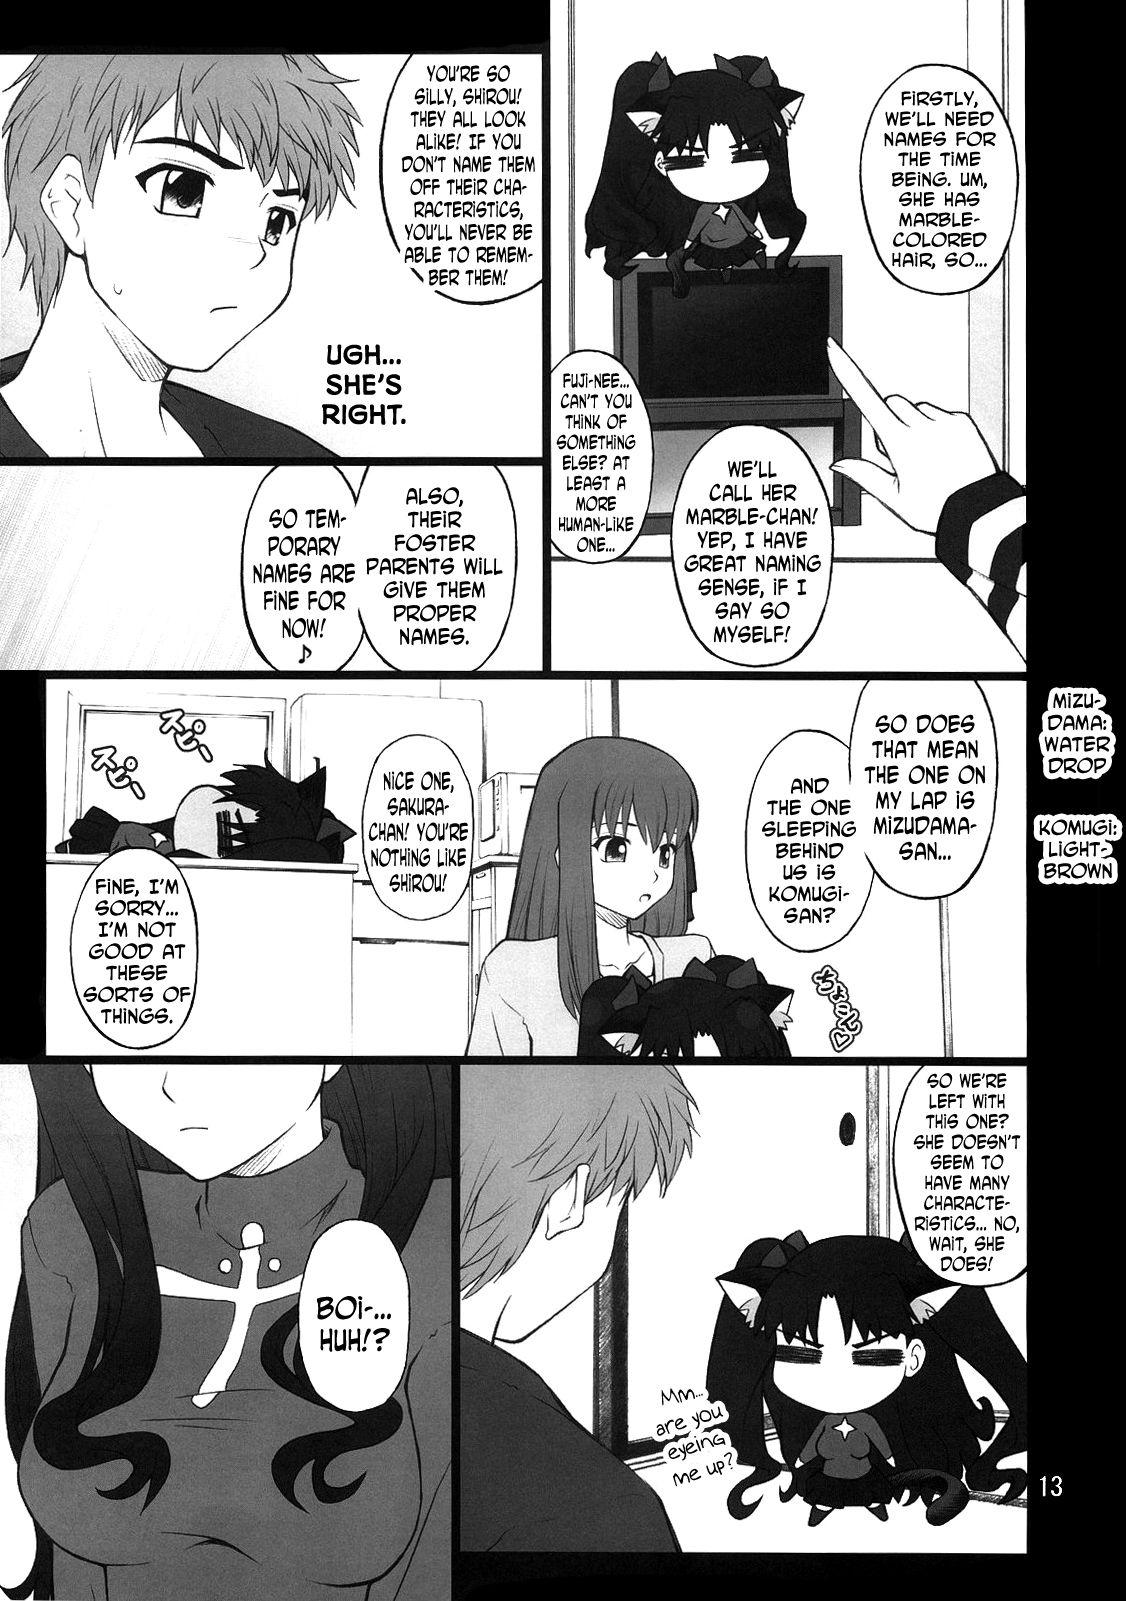 Facesitting Grem-Rin 2 - Fate stay night Pool - Page 12